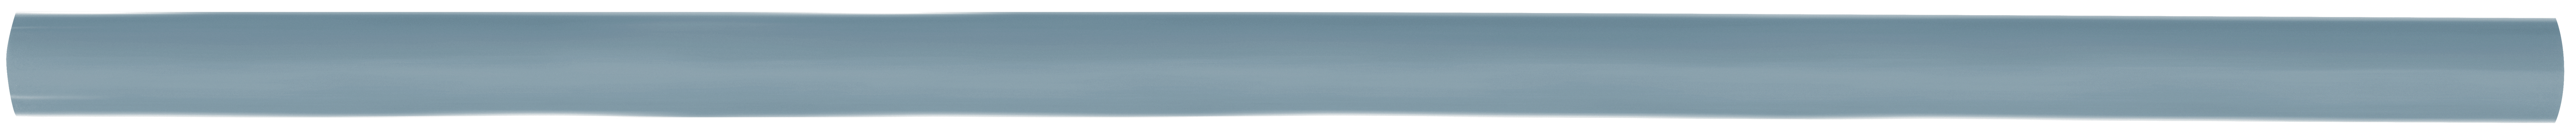 sky pattern glazed ceramic quarter round molding from teramoda anatolia collection distributed by surface group international glossy finish pressed edge 12-inch bar shape